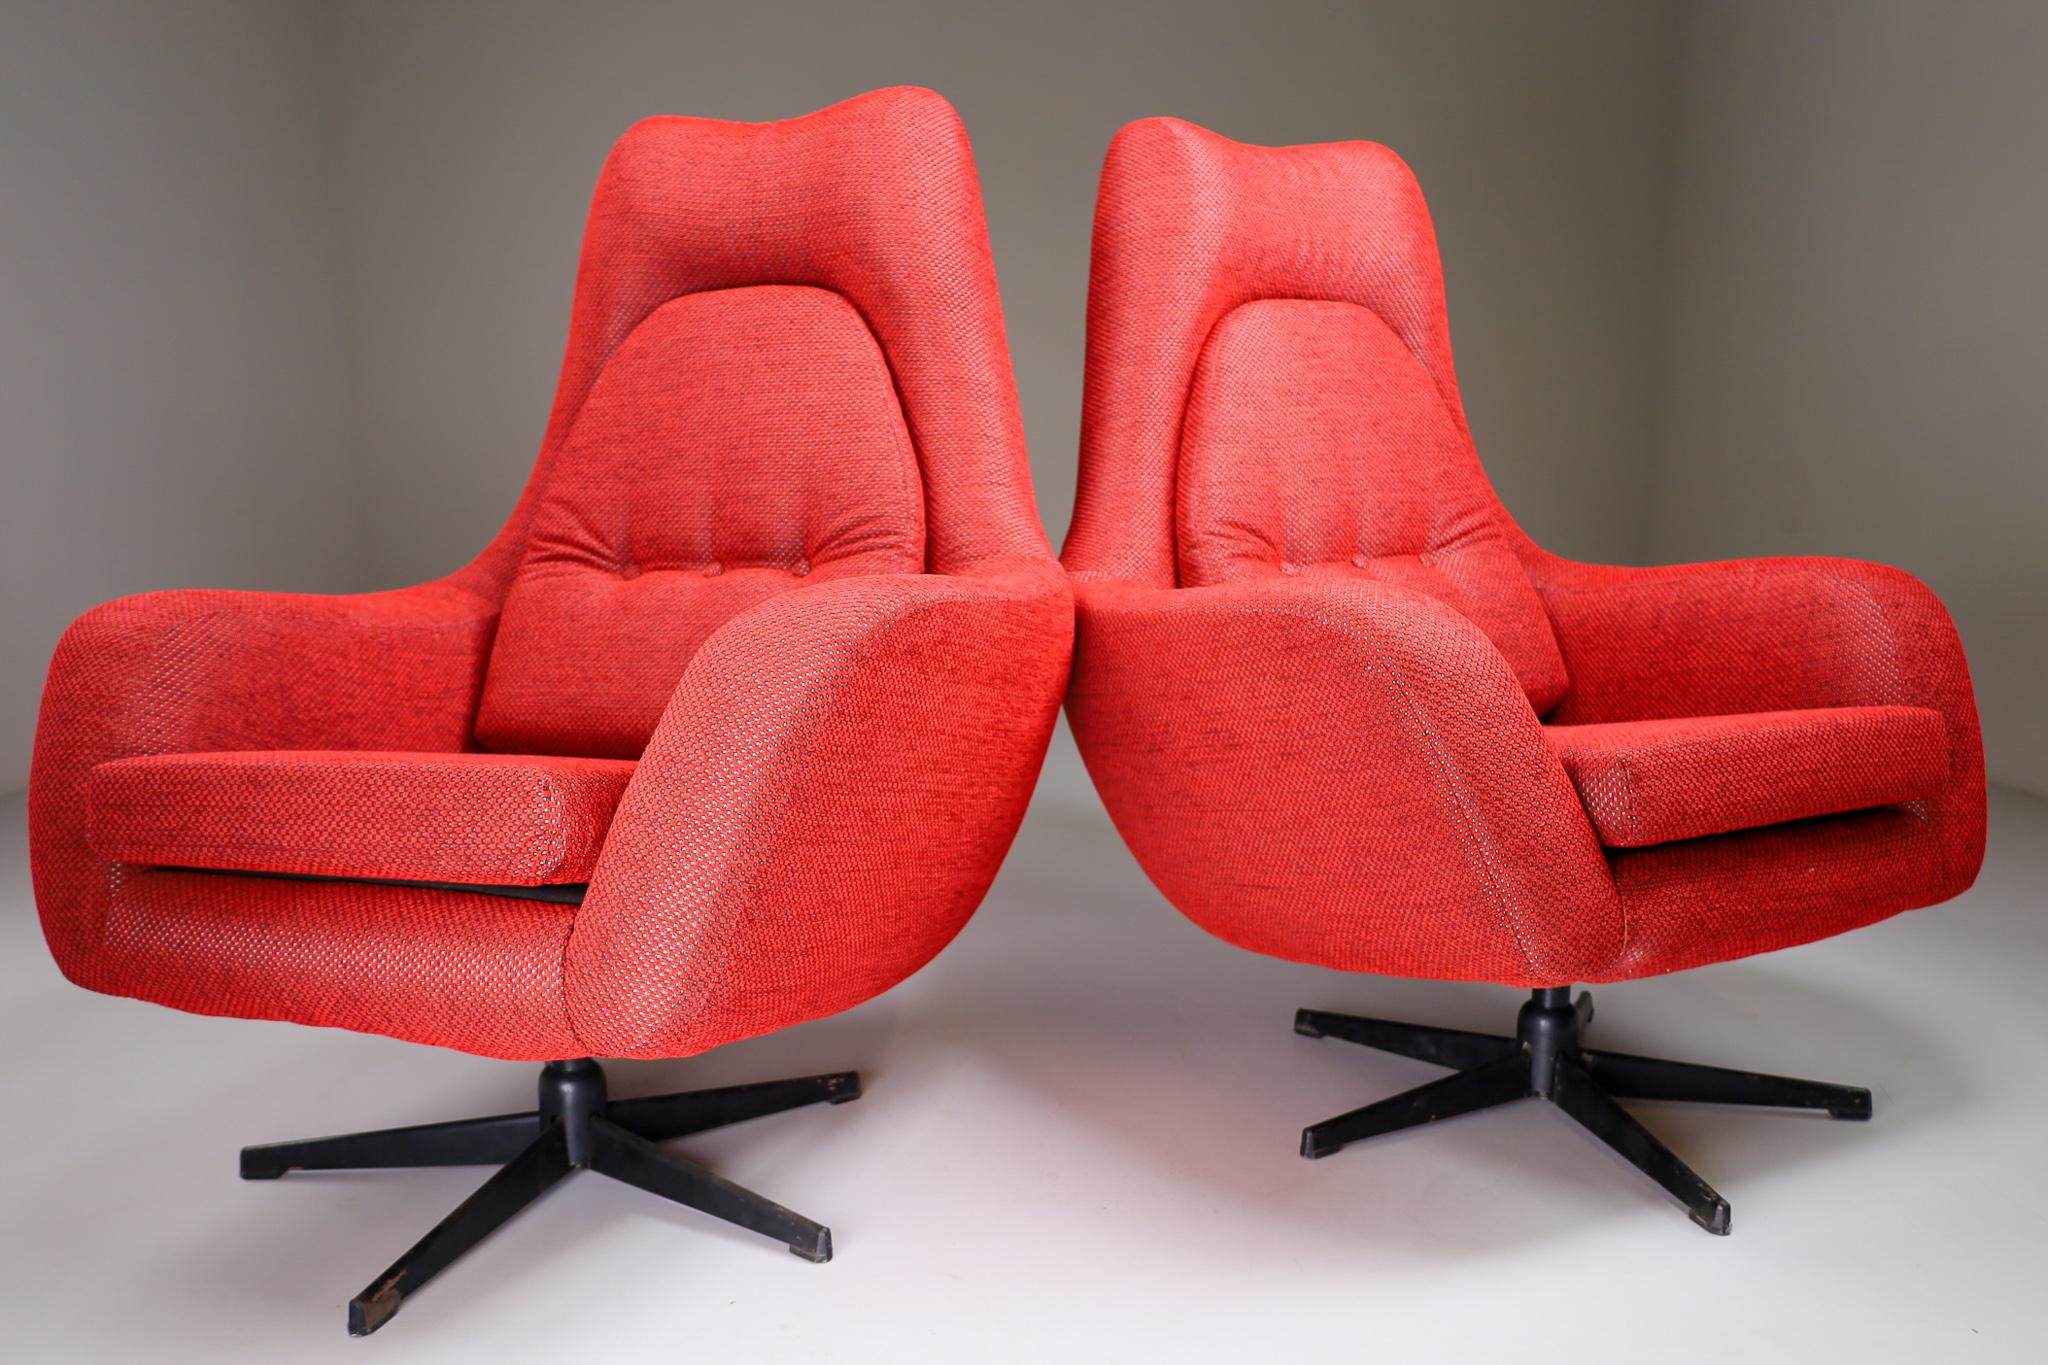 This Swivel chair in new reupholstered red fabric is made in Czech republic around 1970. This armchair would make an eye-catching addition to any interior such as living room, family room, screening room or even in the office. It also perfectly fits